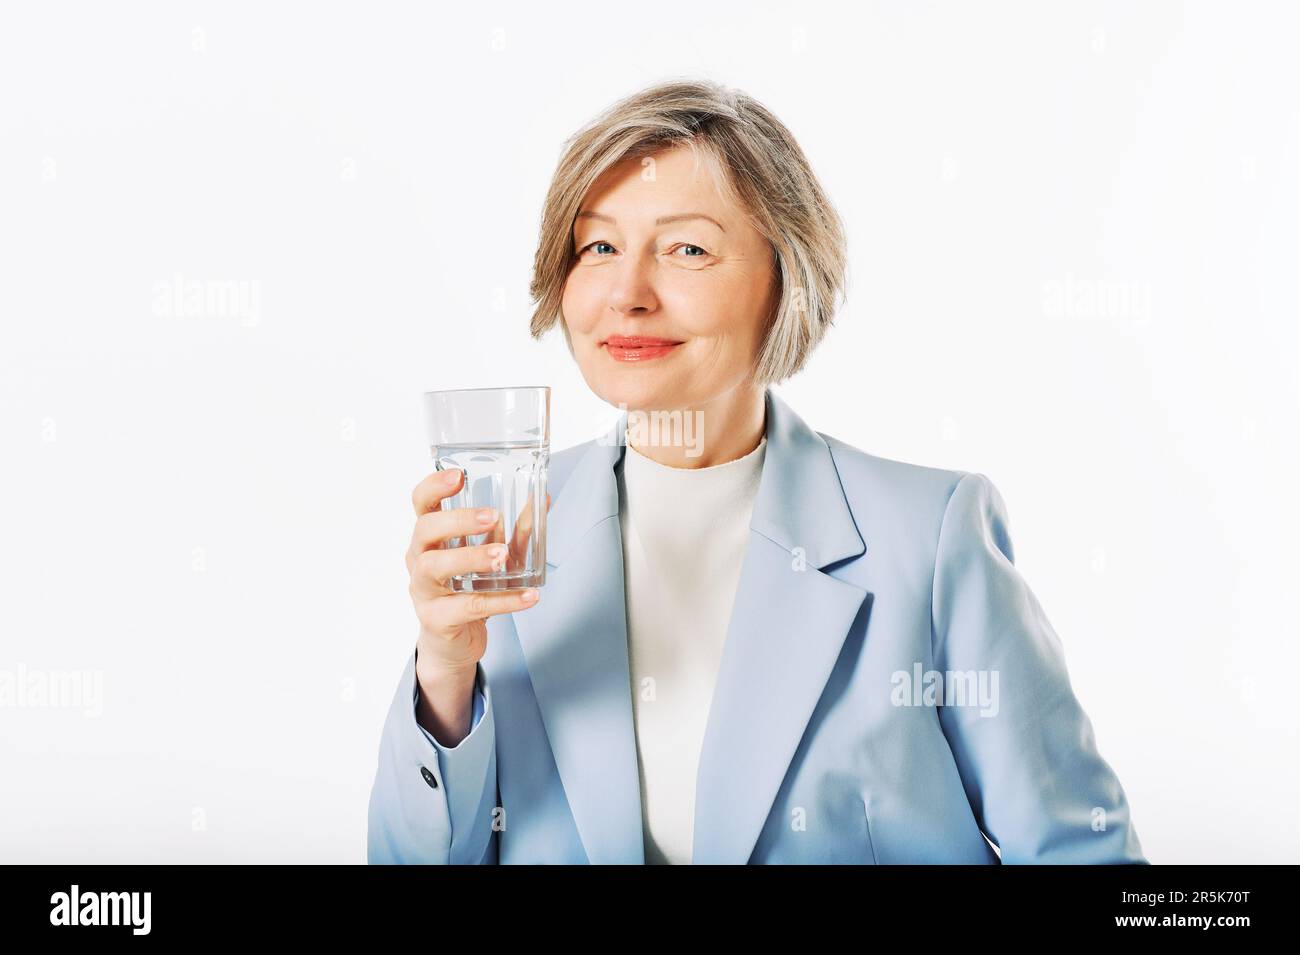 Studio portrait of middle age woman posing on white background, 55 - 60 year old female model holding glass of water Stock Photo